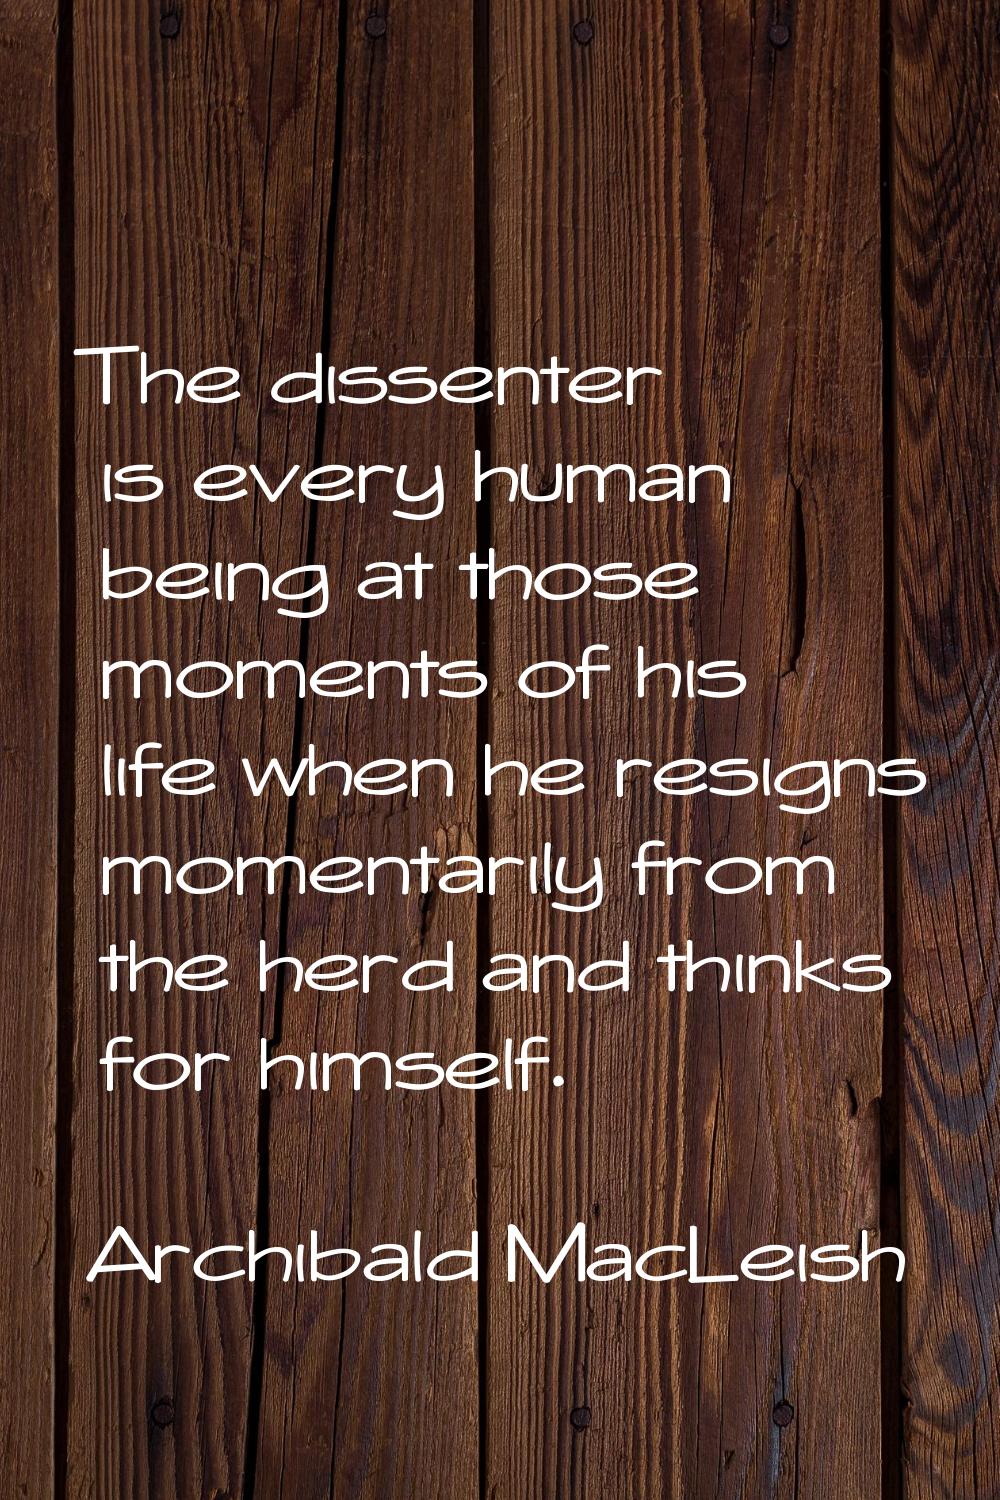 The dissenter is every human being at those moments of his life when he resigns momentarily from th